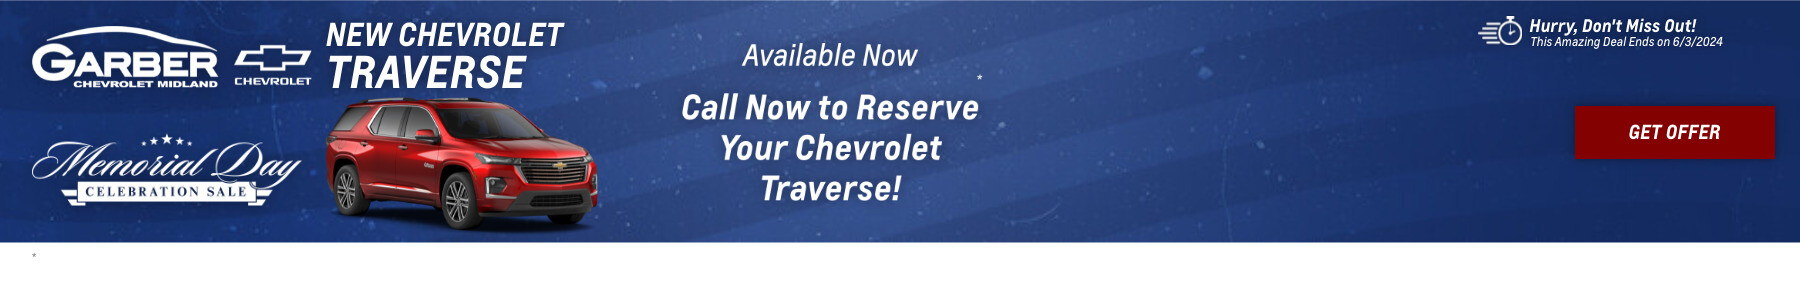 New Chevrolet Traverse Current Deals and Offers in Midland, MI